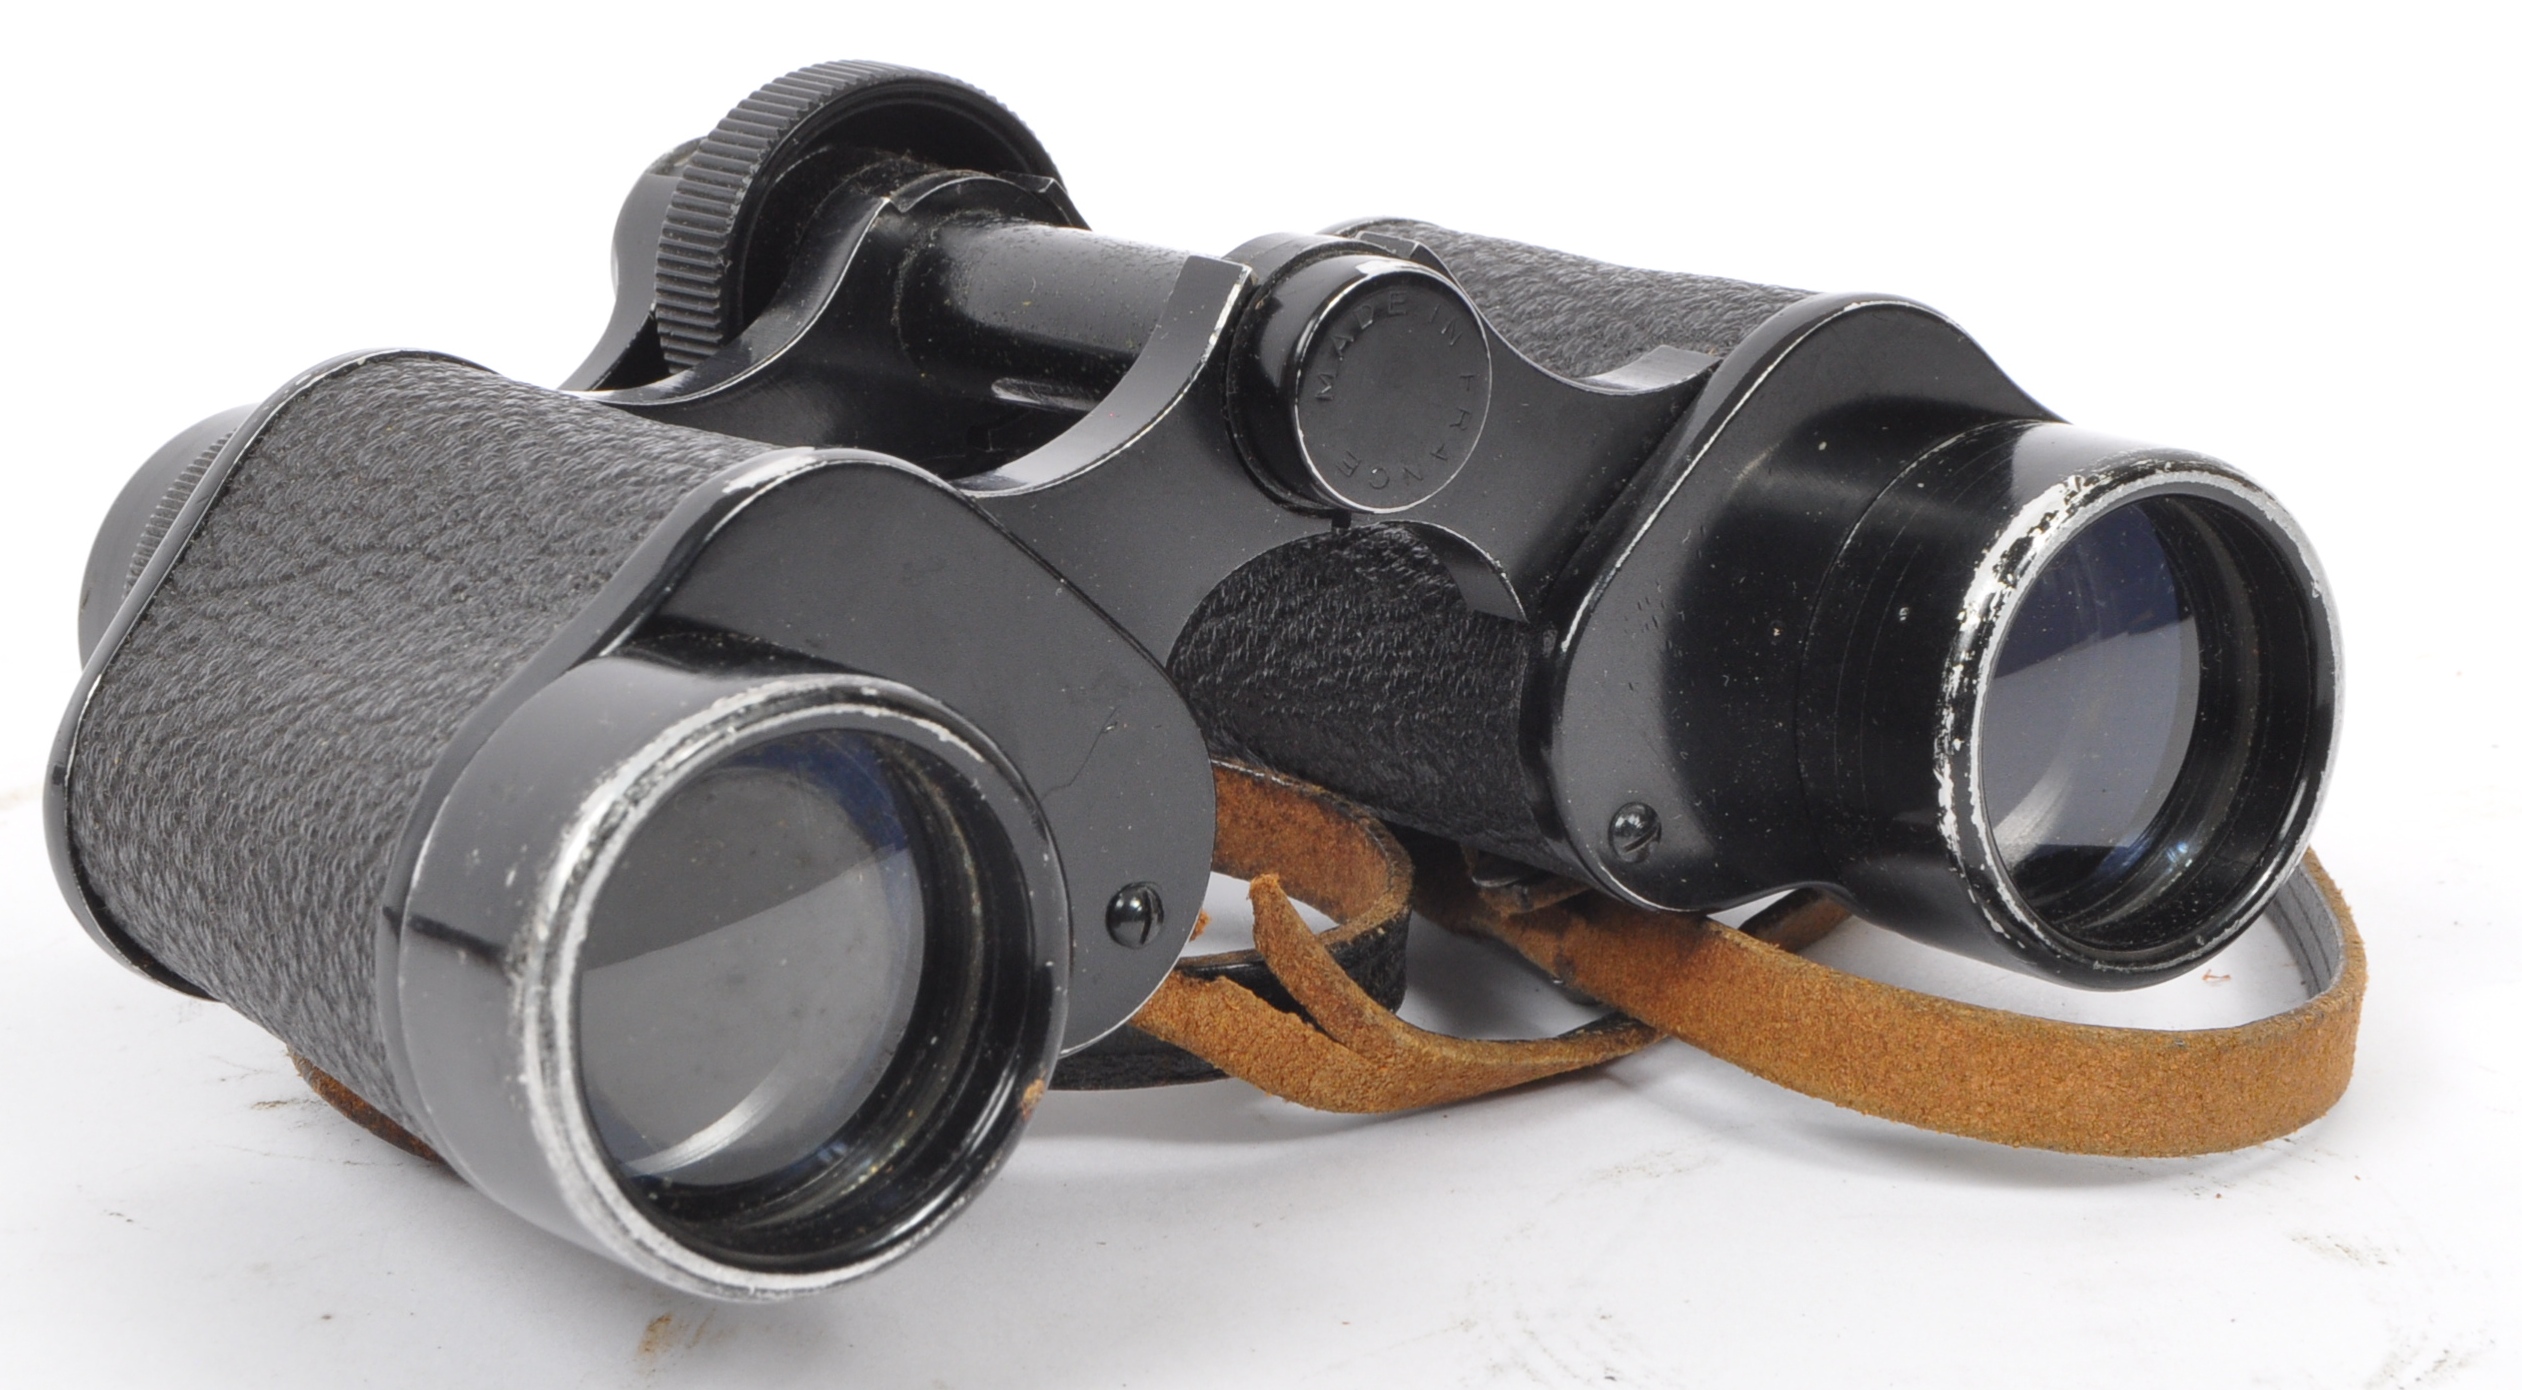 TWO 20TH CENTURY BINOCULARS - CARL ZEISS AND INVINCIBLE - Image 4 of 6